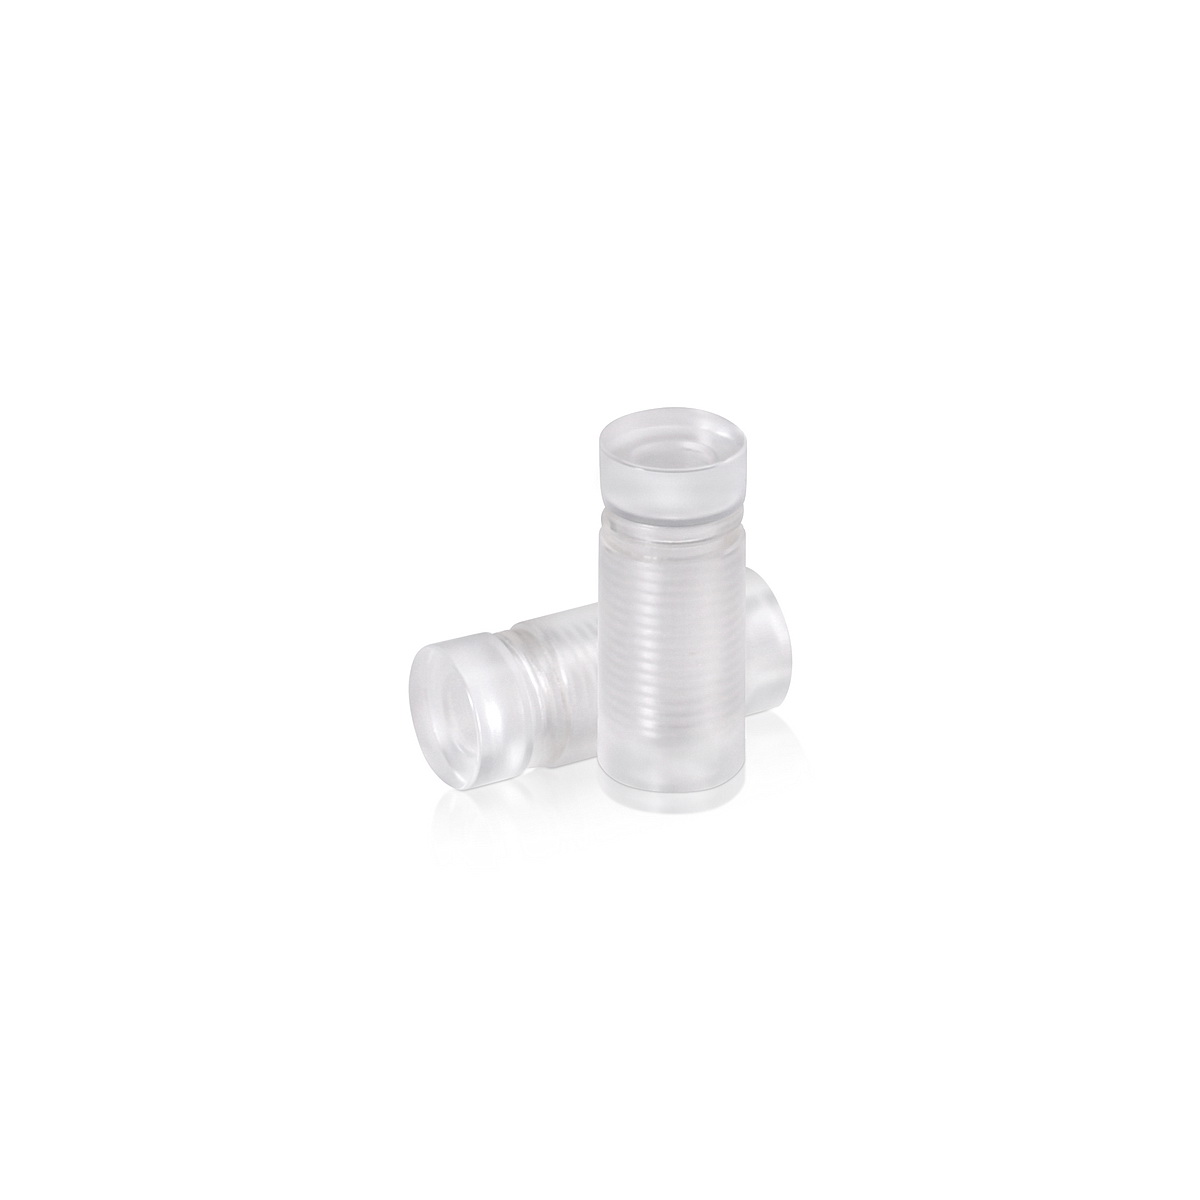 1/2'' Diameter X 3/4'' Barrel Length, Clear Acrylic Standoff. Easy Fasten Standoff (For Inside Use Only) Tamper Proof [Required Material Hole Size: 3/8'']